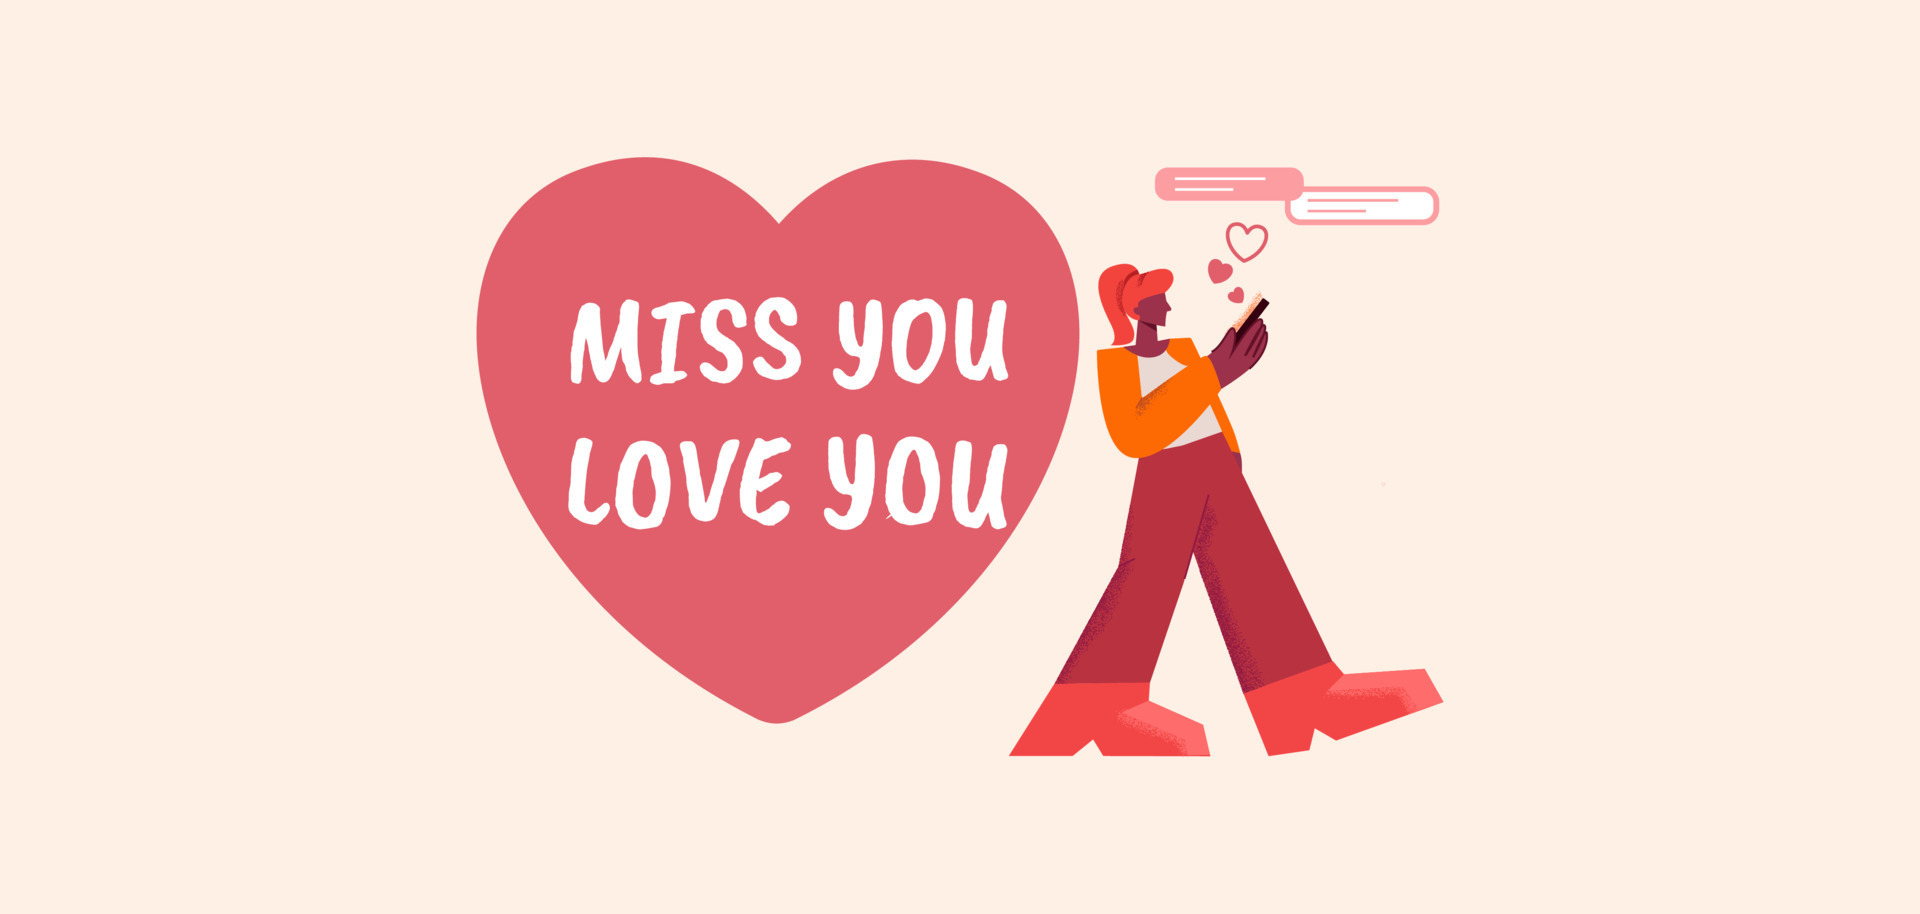 Miss you love you poster. Romantic message in shape red heart and ...